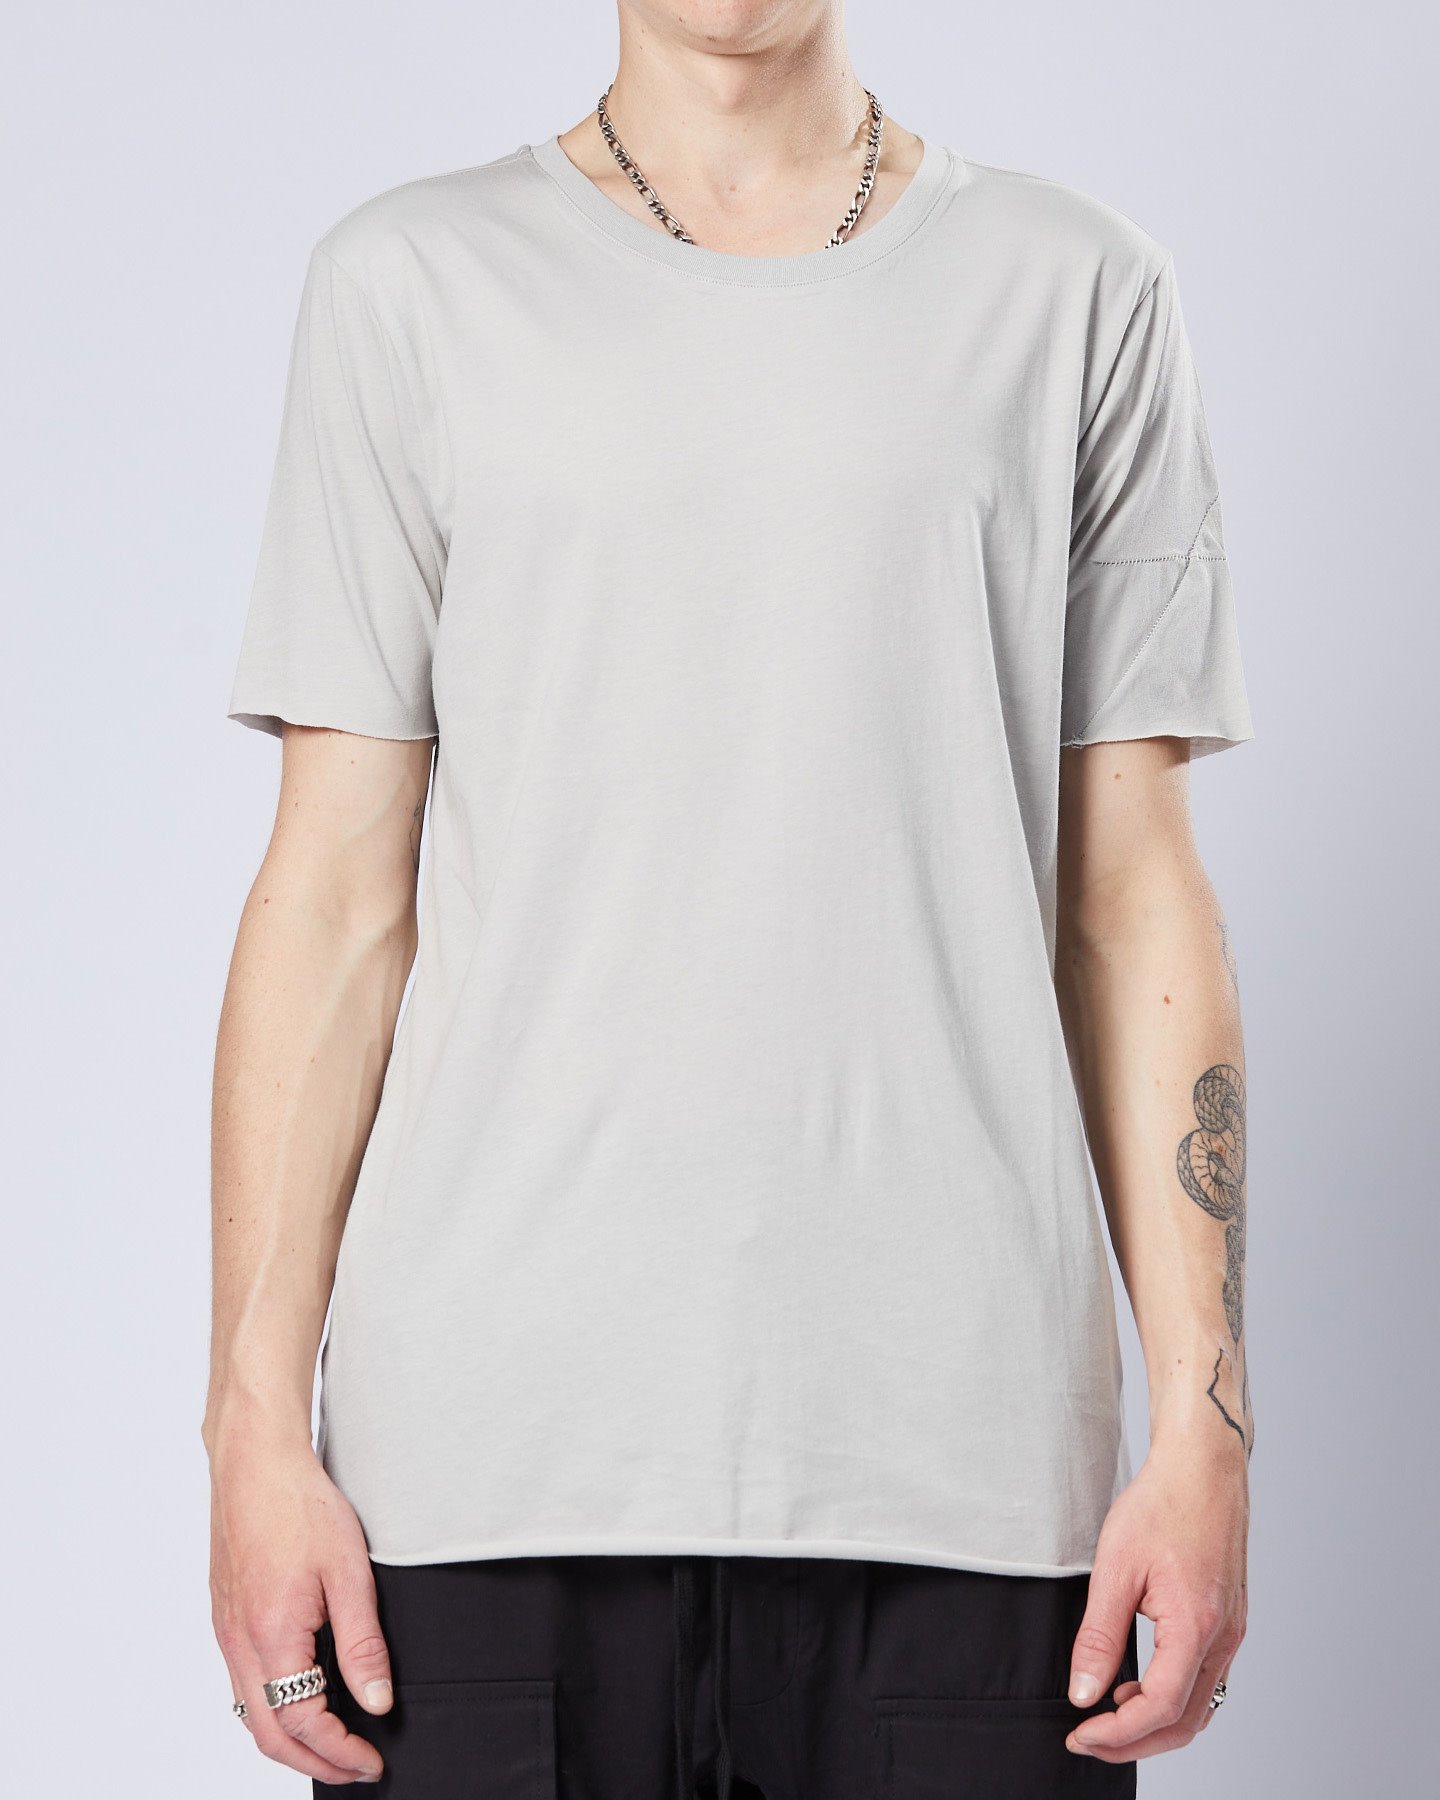 RAW HEM FITTED COTTON T-SHIRT - SILVER